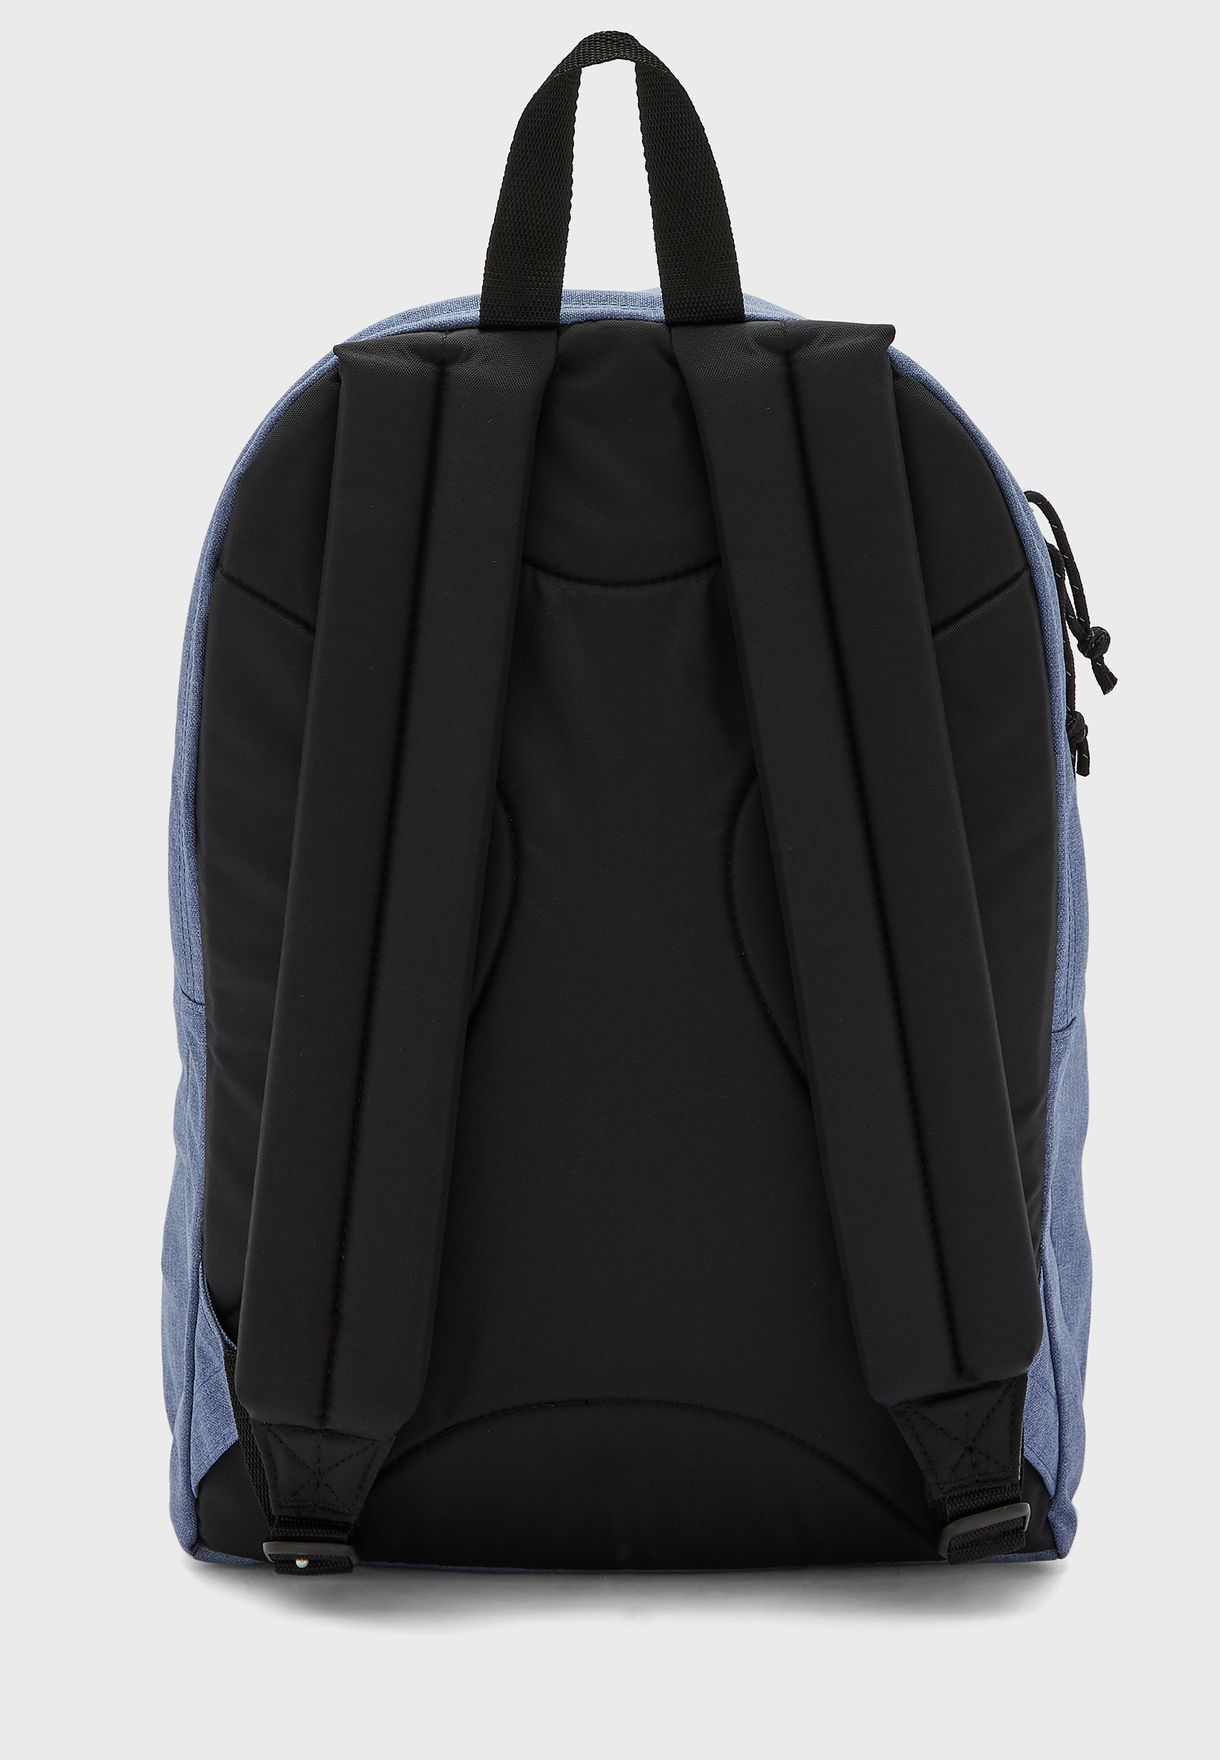 Back To Work Backpack